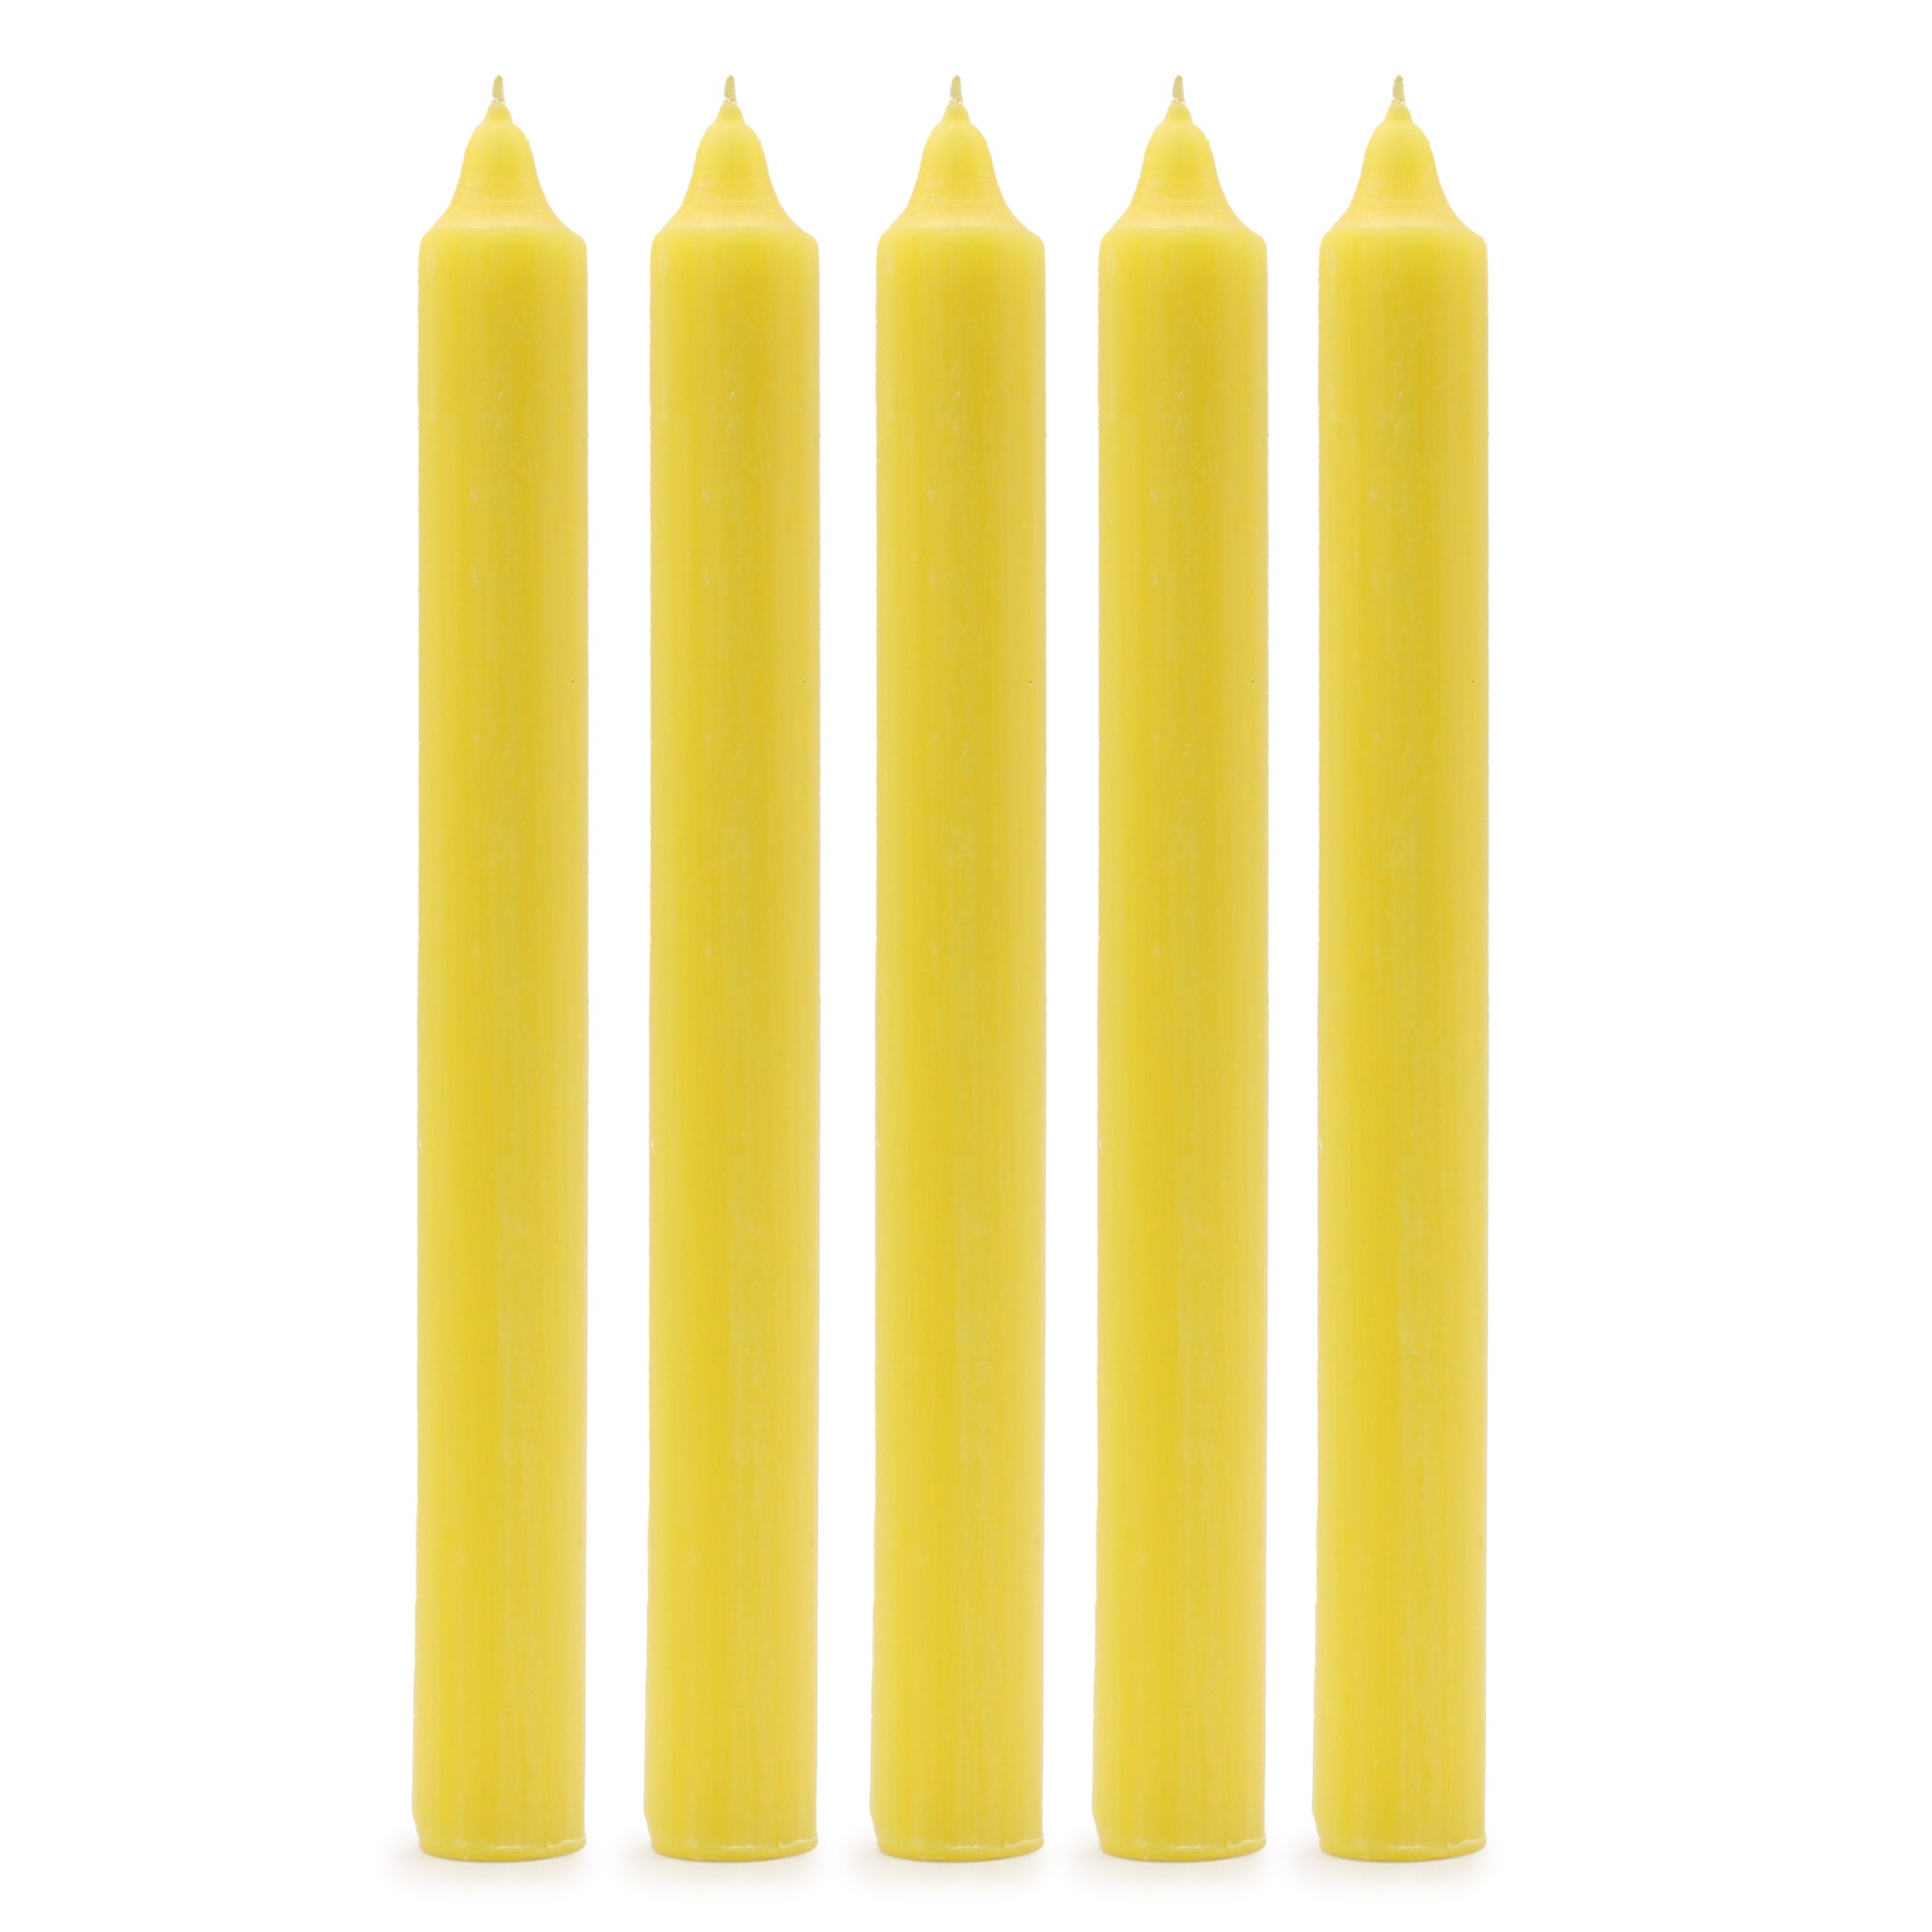 View Solid Colour Dinner Candles Rustic Lemon Pack of 5 information